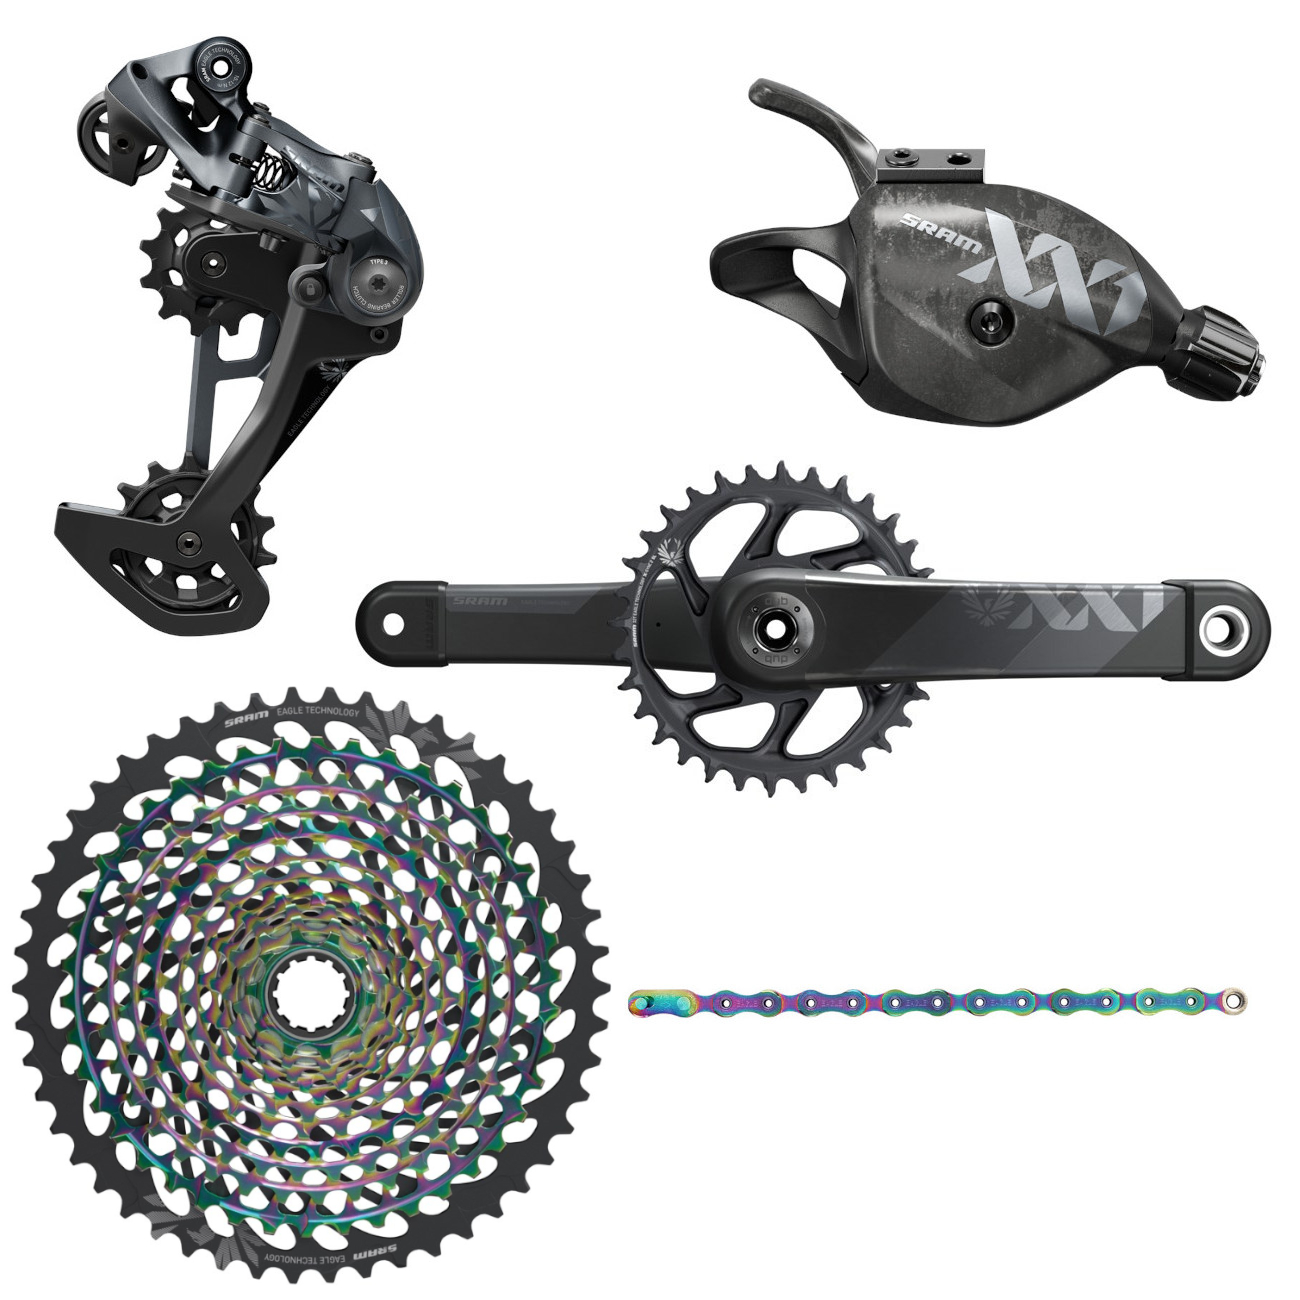 Picture of SRAM XX1 Eagle Boost Groupset - 1x12-speed - Trigger Shifter - 10-50 t. XG-1299 Cassette - rainbow